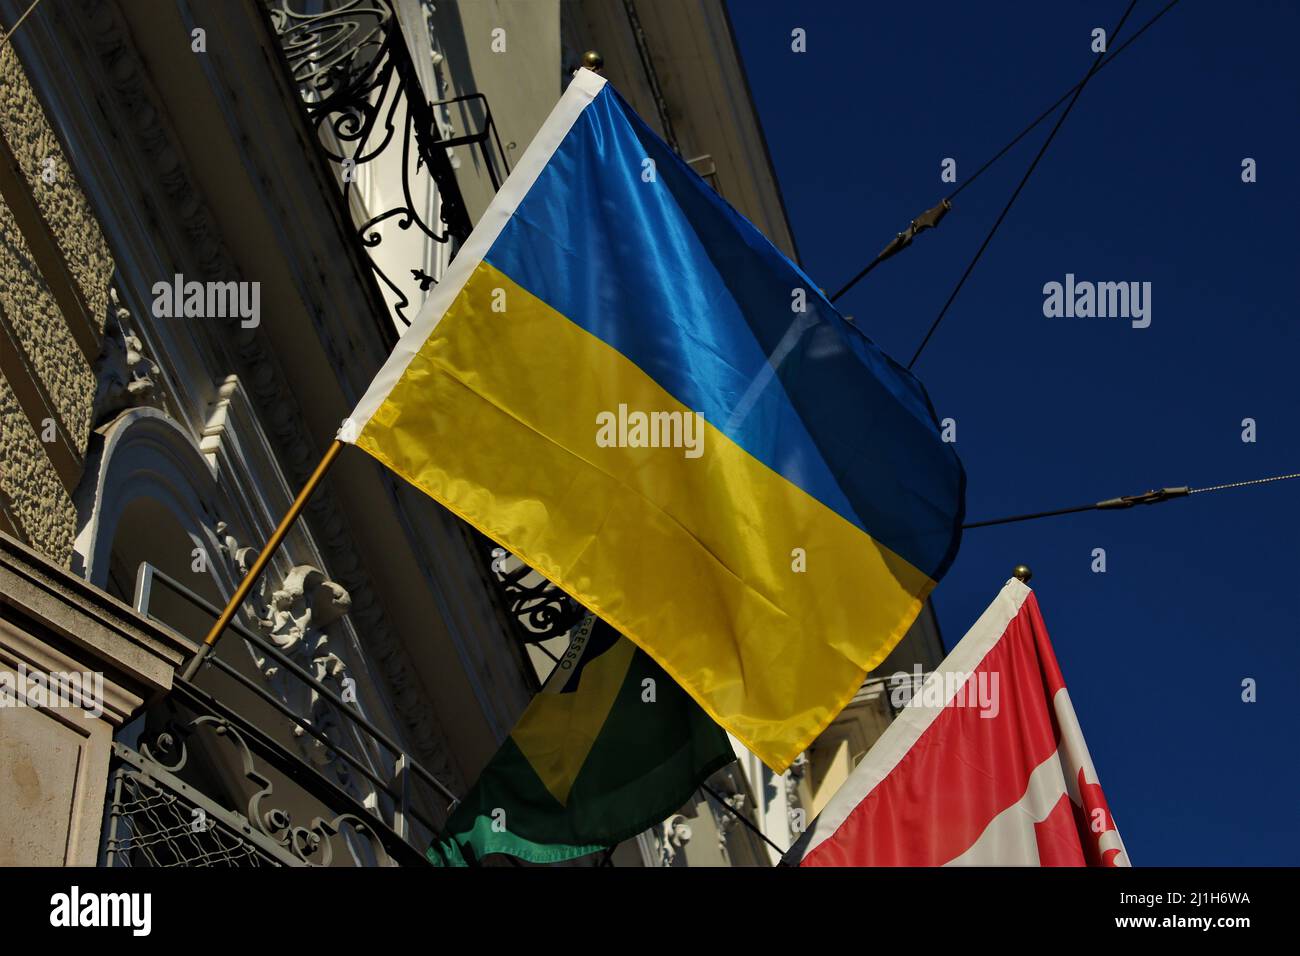 Flag of Ukraine billowing in the sun. Real flag seen outdoors. Stock Photo